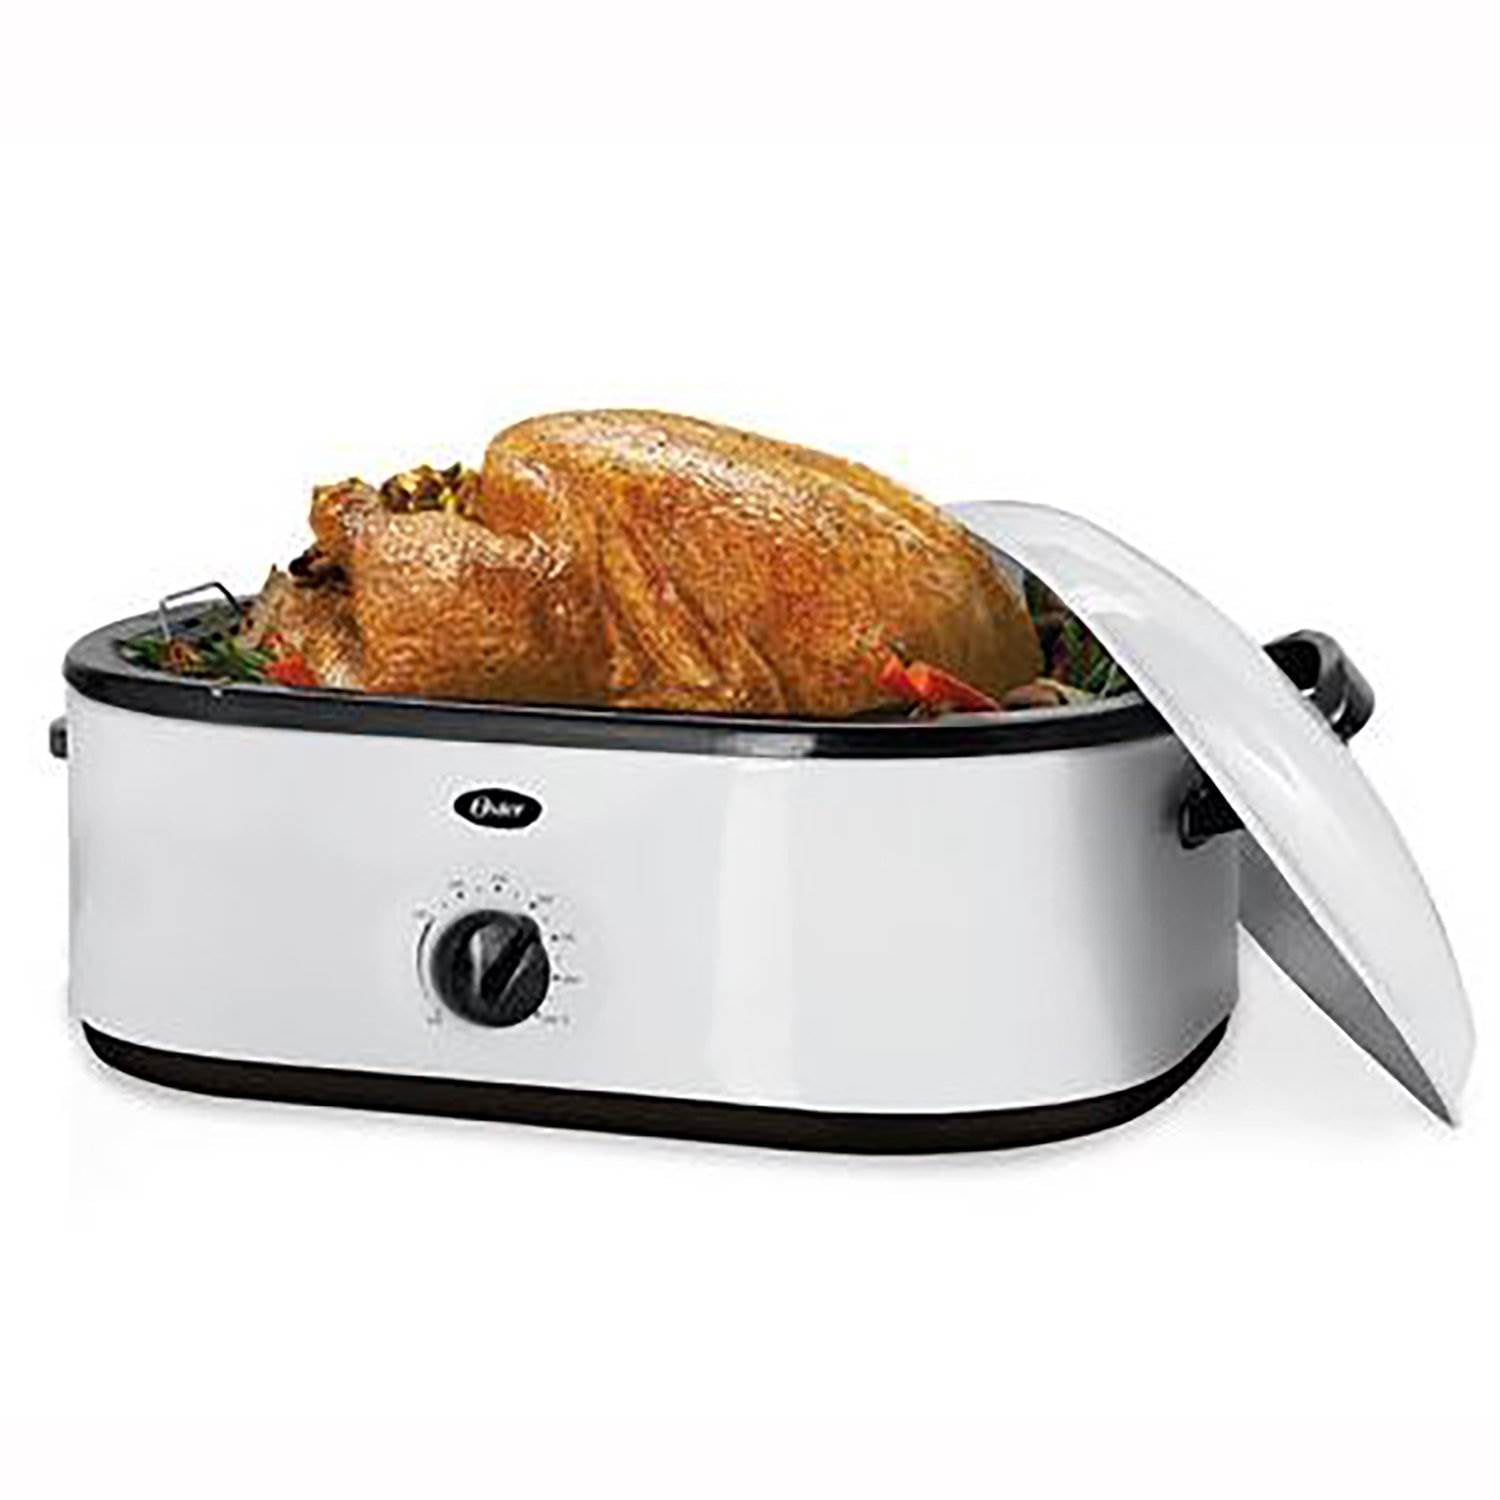 Oster 18-Quart Counter-Top Electric Roaster Oven with Buffet Tray Server, W...